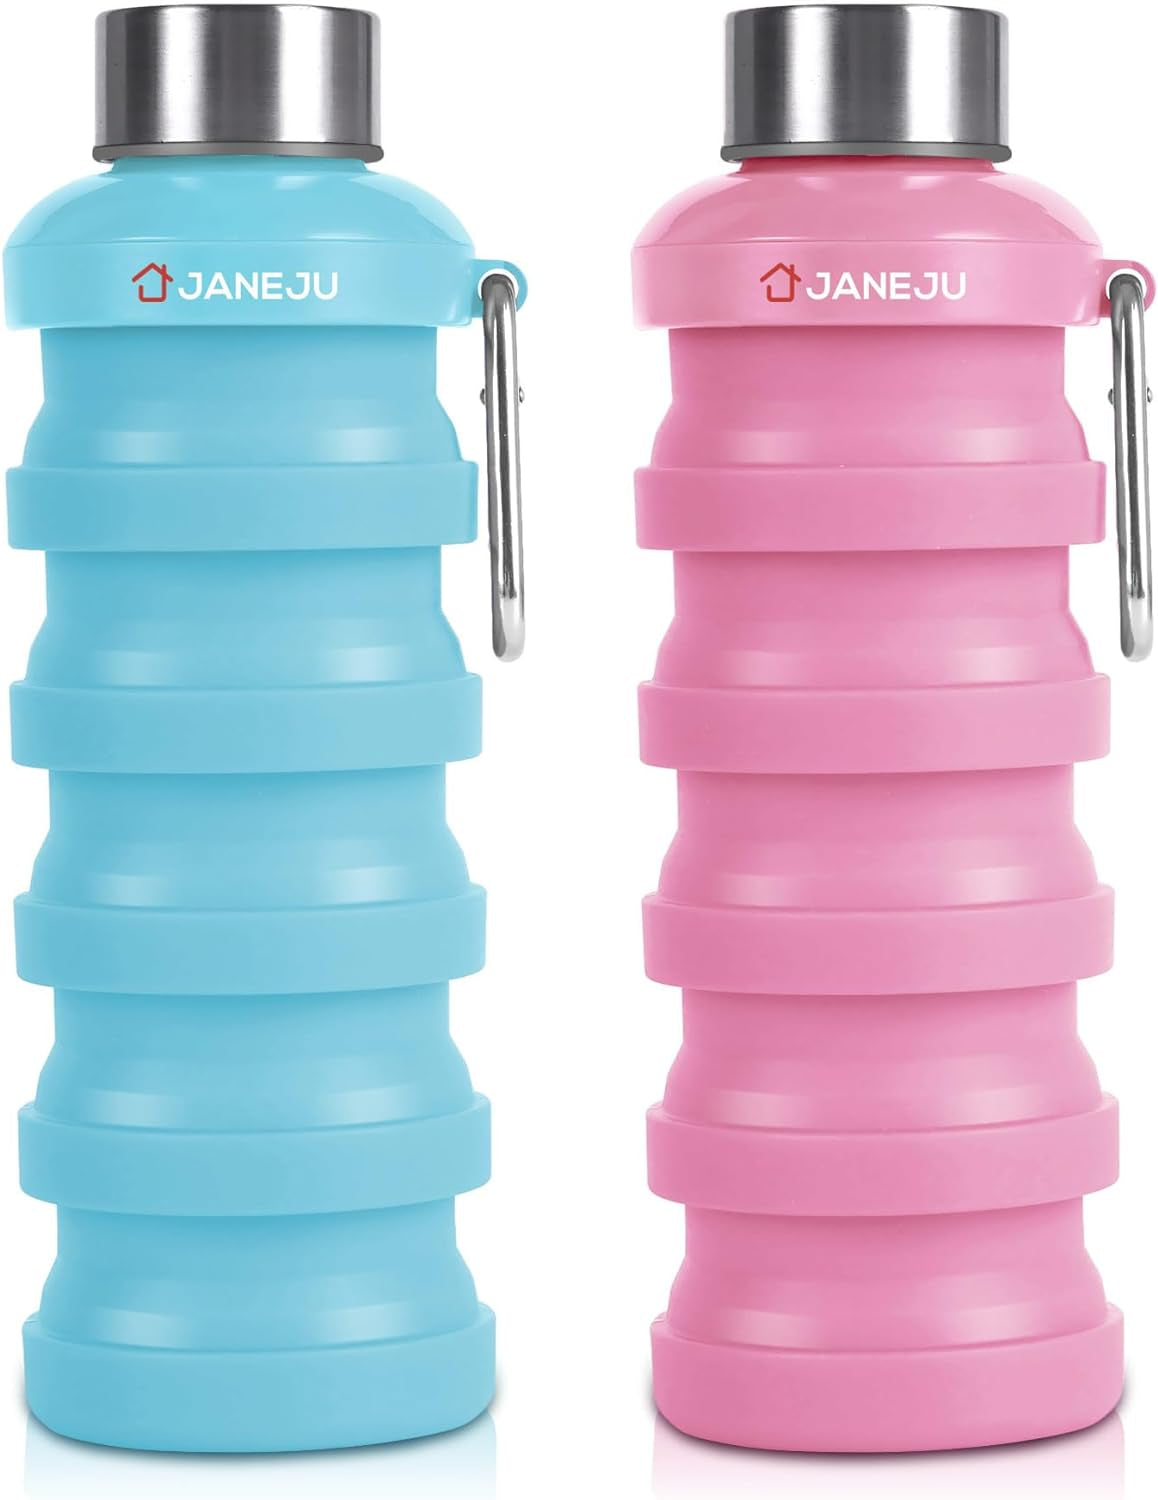 Janeju Collapsible Water Bottle, 17Oz BPA Free Silicone Reusable Portable Lightweight Foldable Water Bottles with Carabiner, Portable Leak Proof Sports Water Bottle (Green)